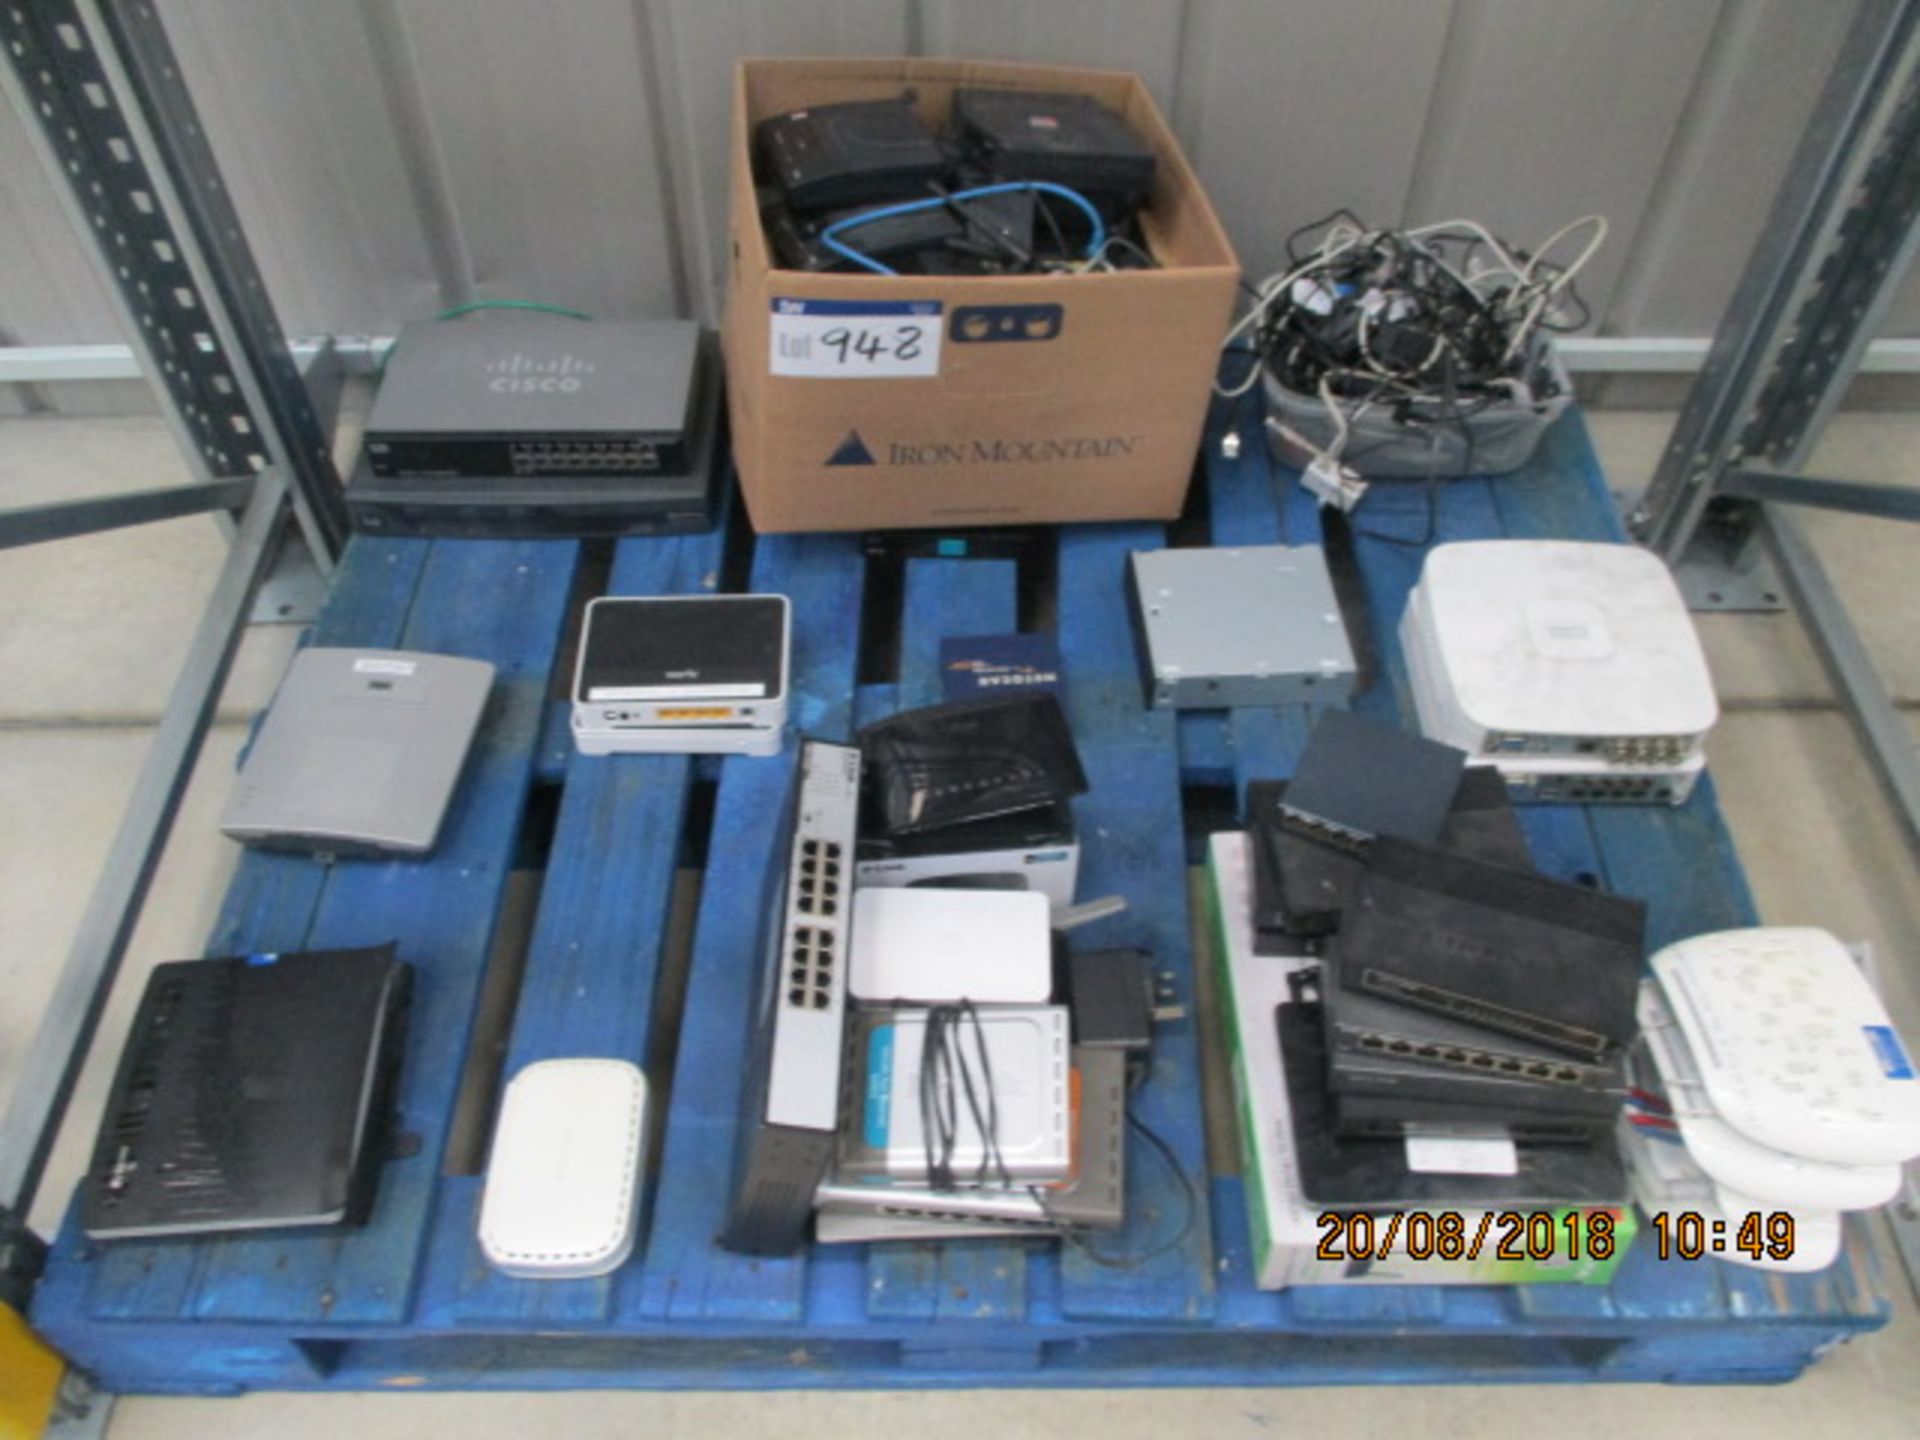 Various Switches, Routers and Modems on pallet